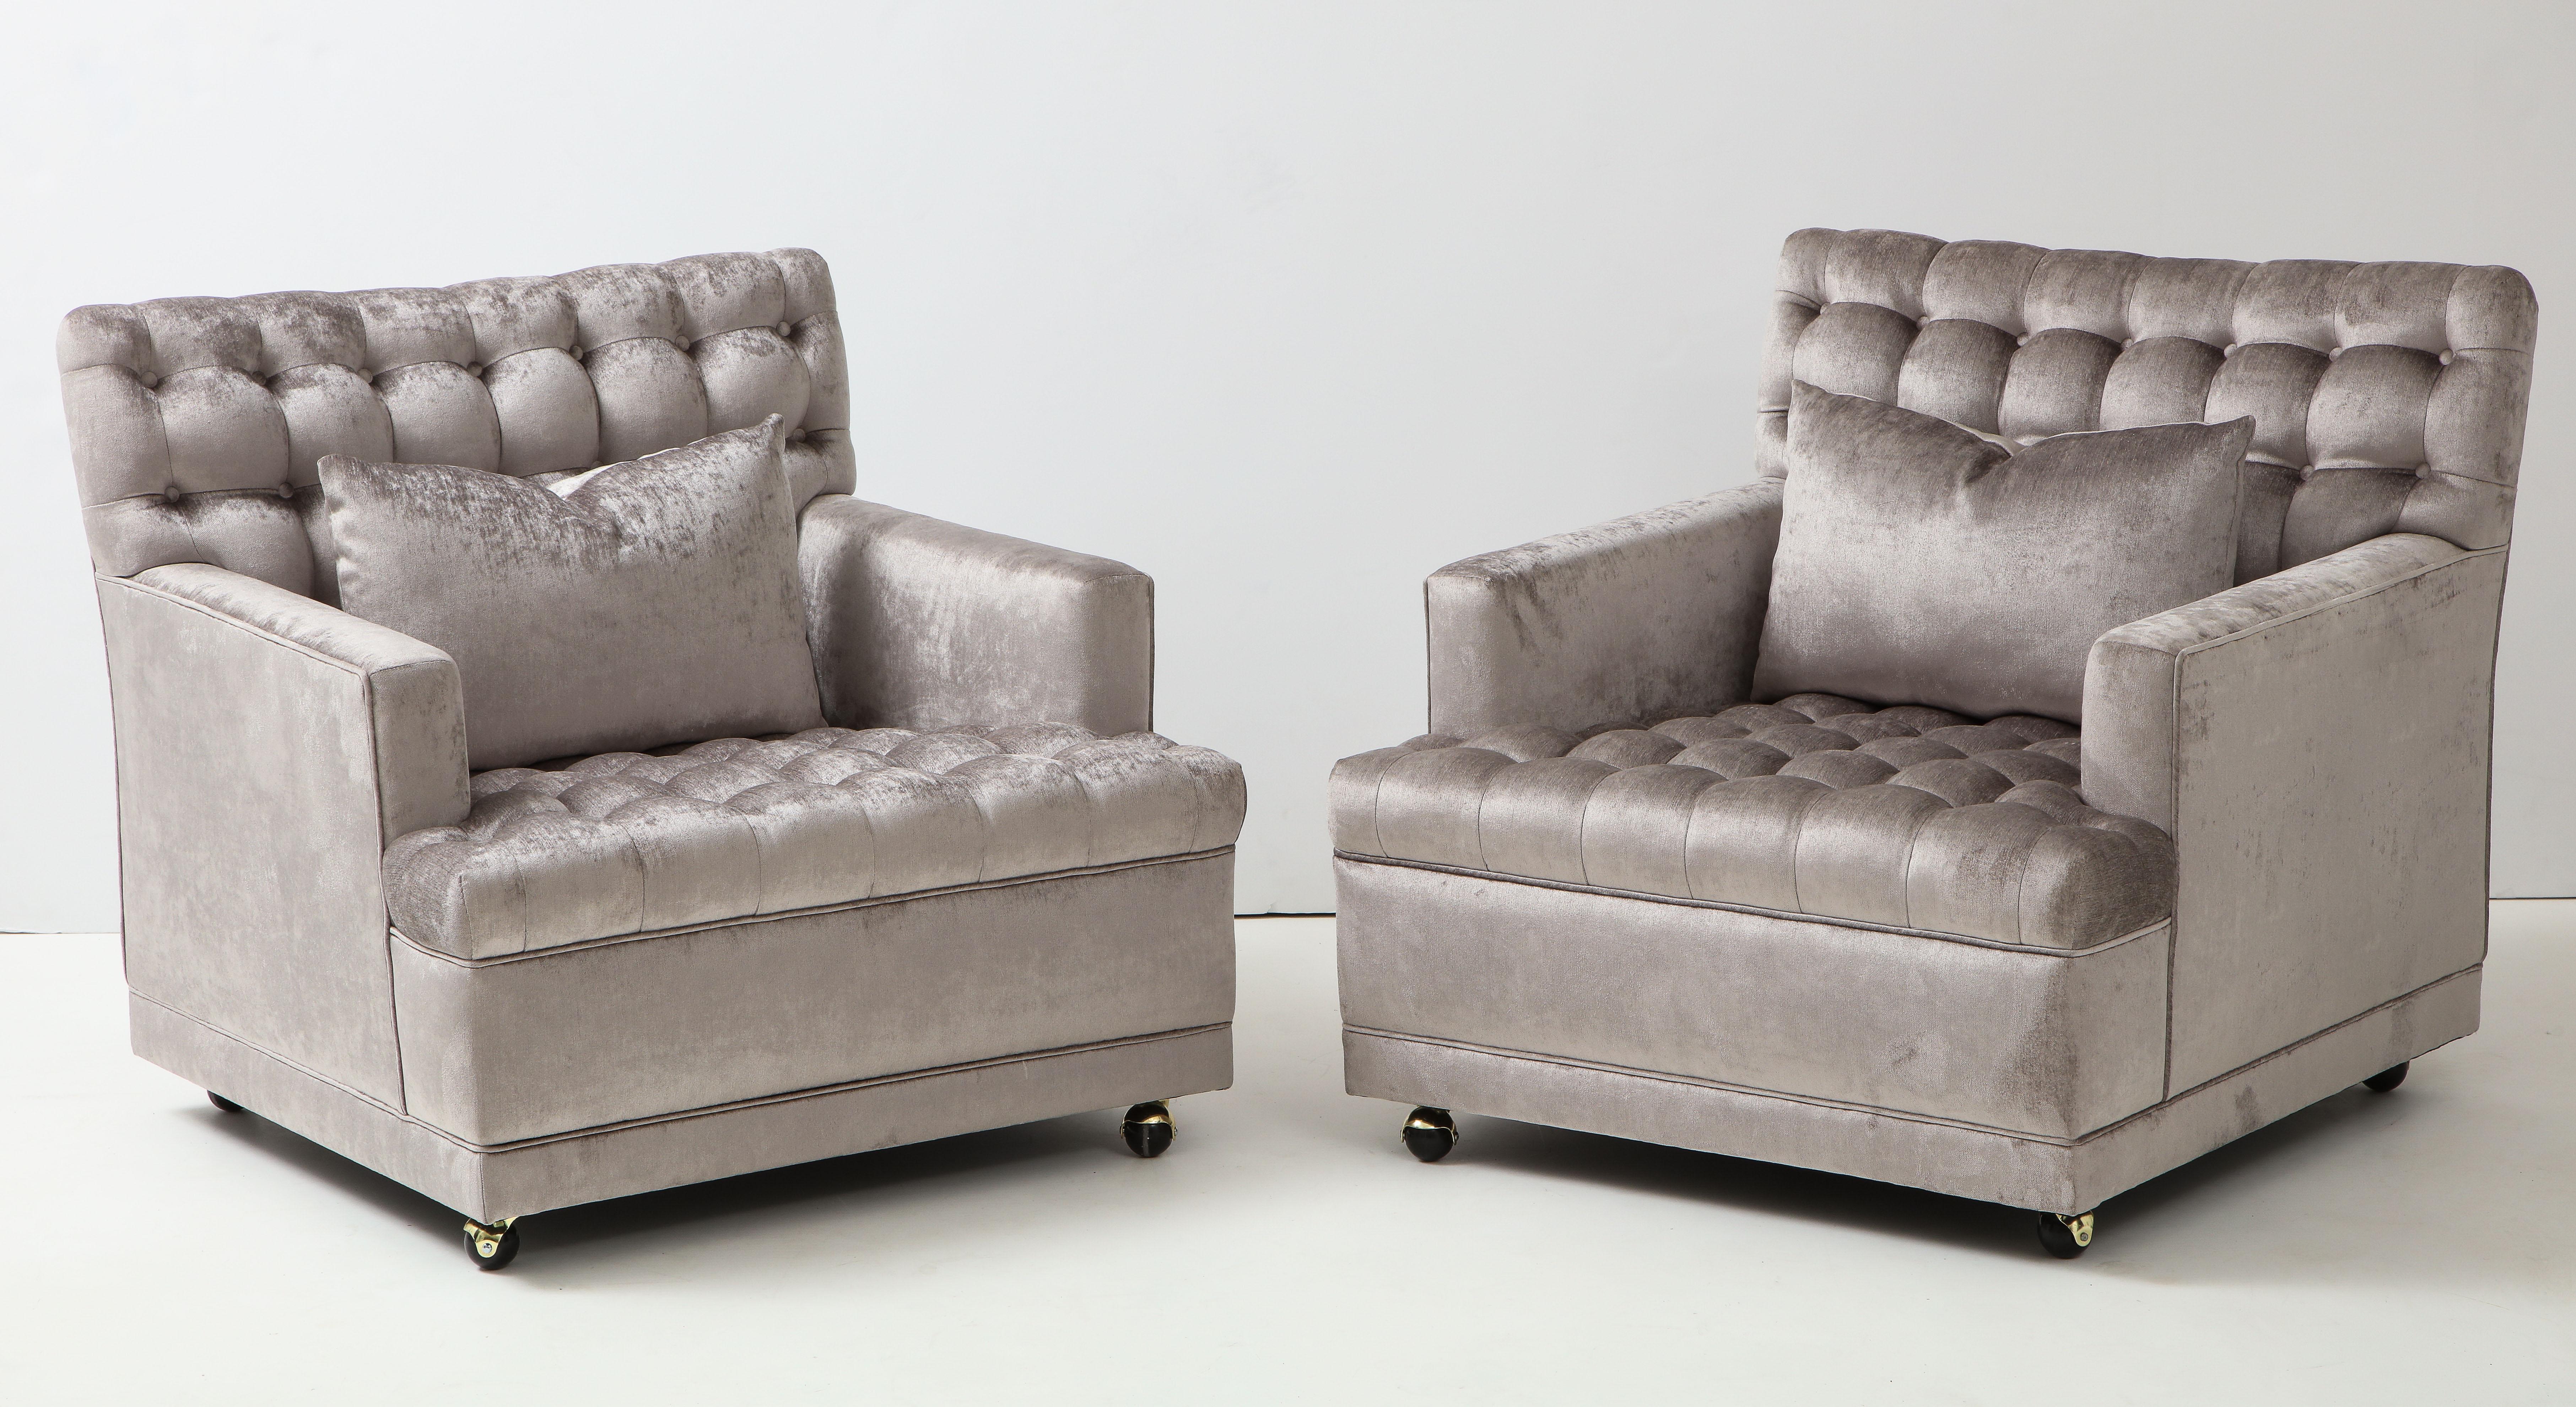 Fabric Pair of Biscuit Tufted Club Chairs.